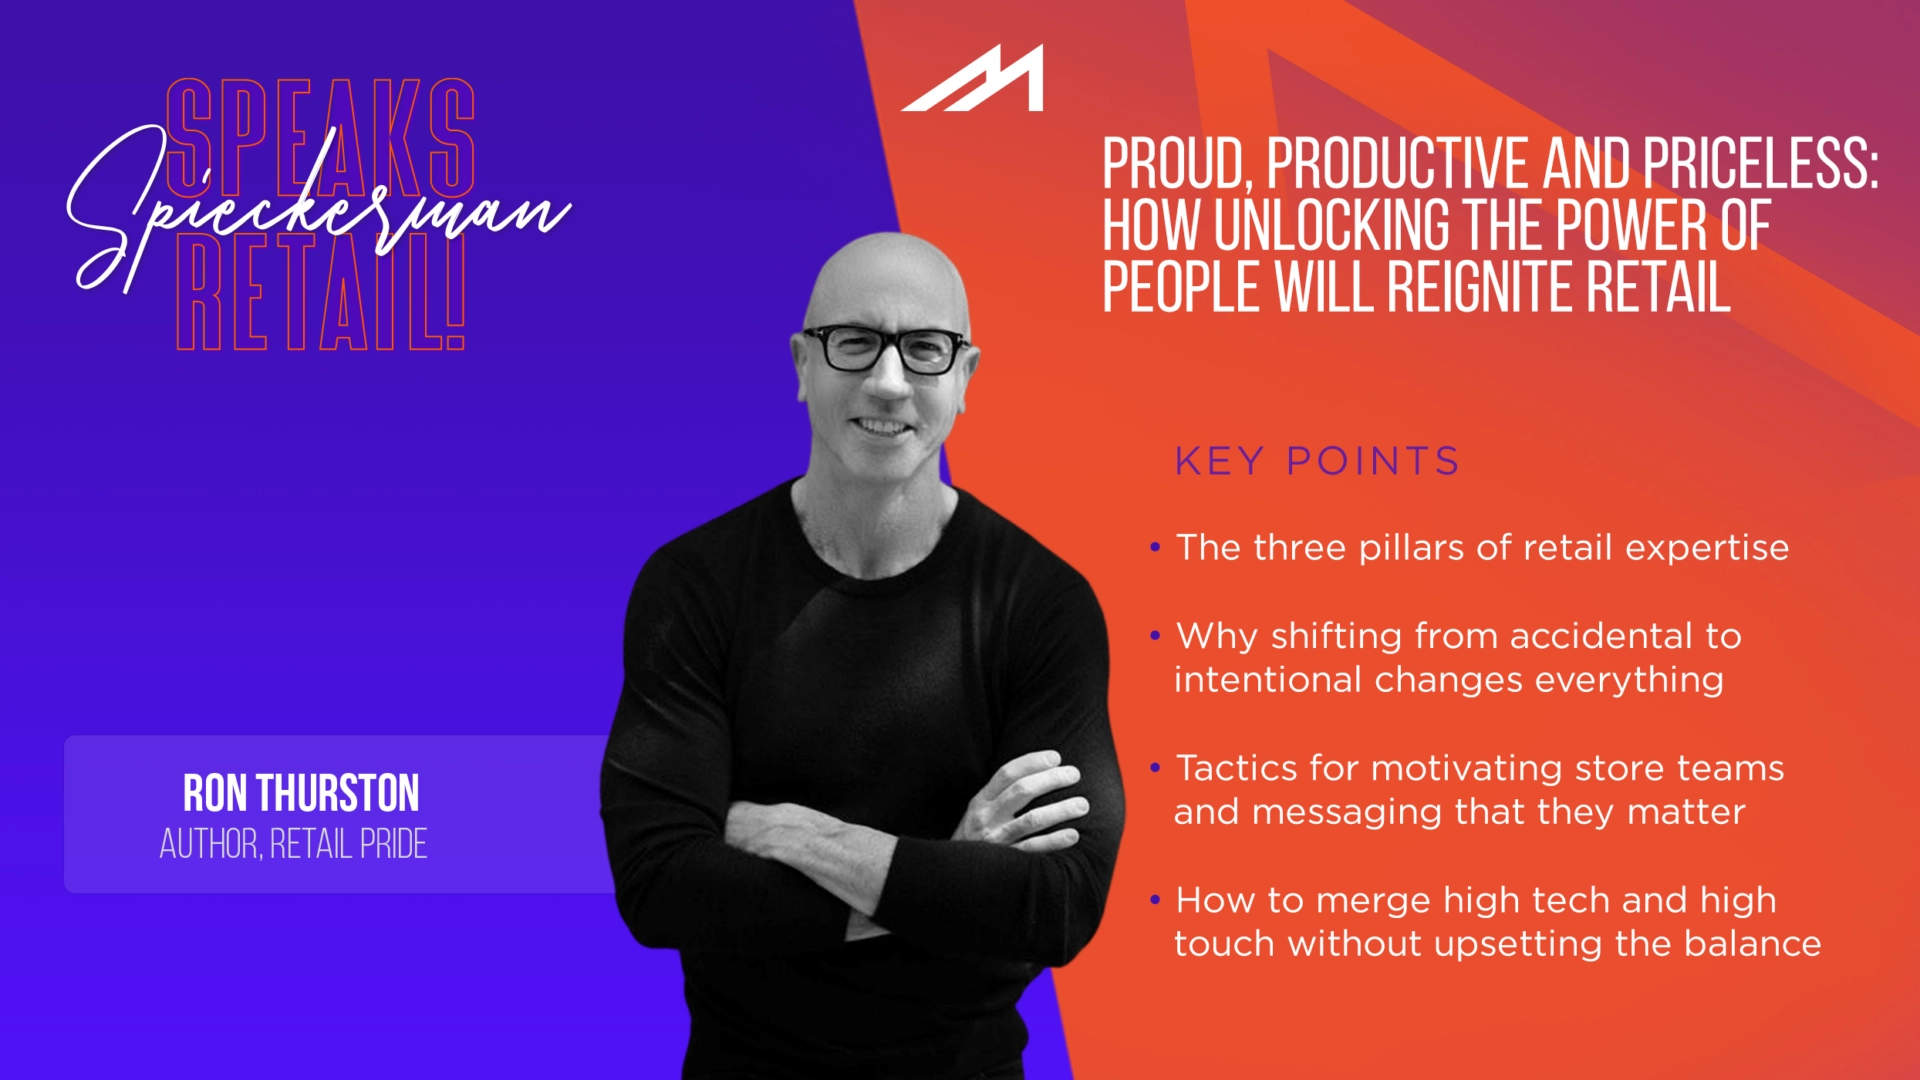 Proud, Productive and Priceless: How Unlocking the Power of People Will Reignite Retail